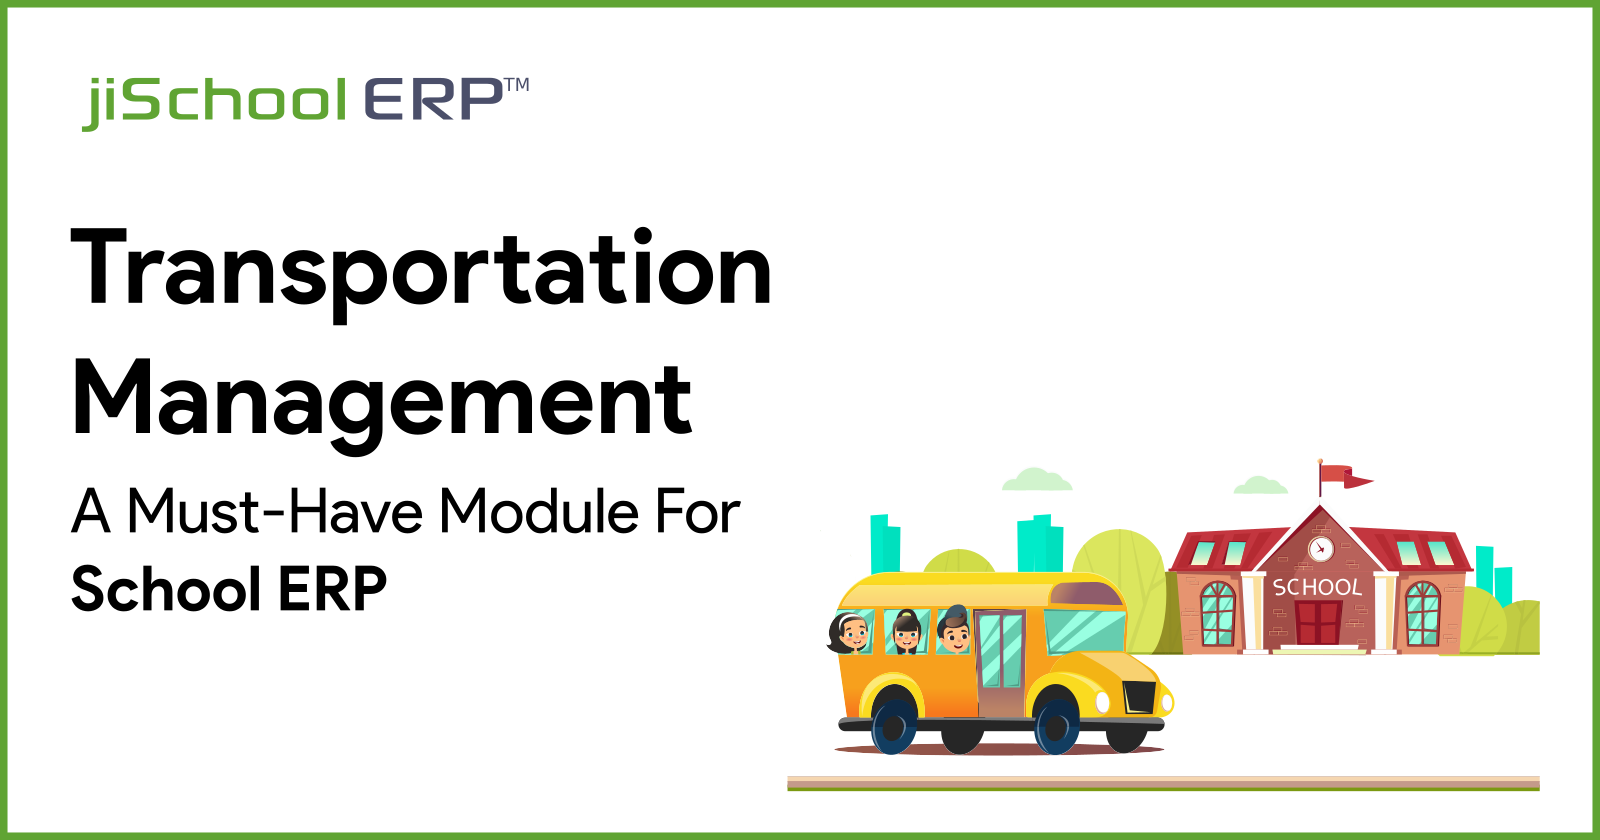 Why Transportation Management Is A Must-Have Module For School ERP?